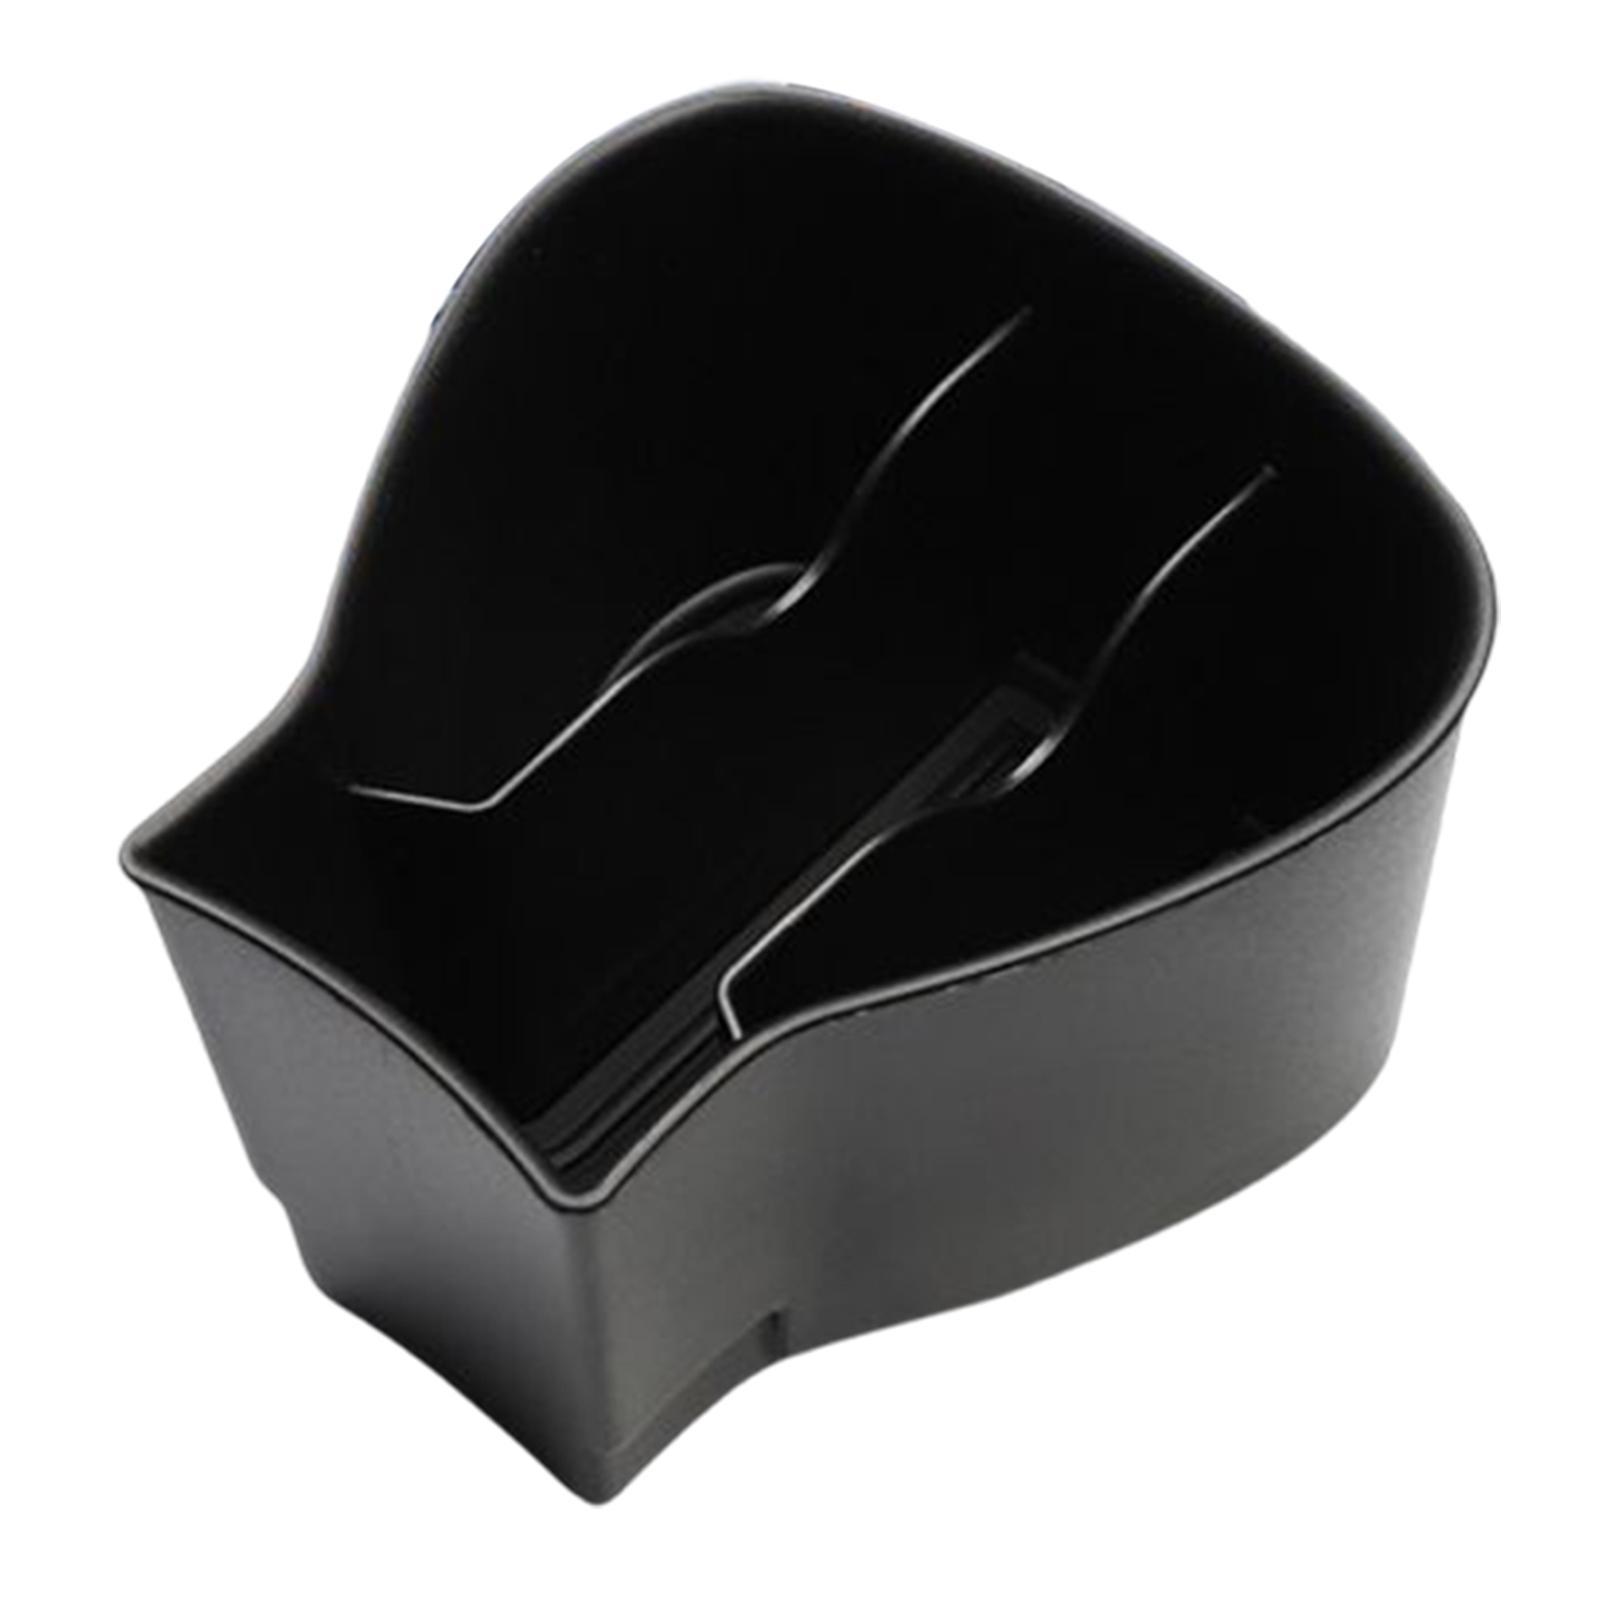 Interior Center Console Organizer Supplies Waterproof ,ABS Plastic, Removeable Dustproof for VW ID.3 Cup Holder Armrest Box Car Products